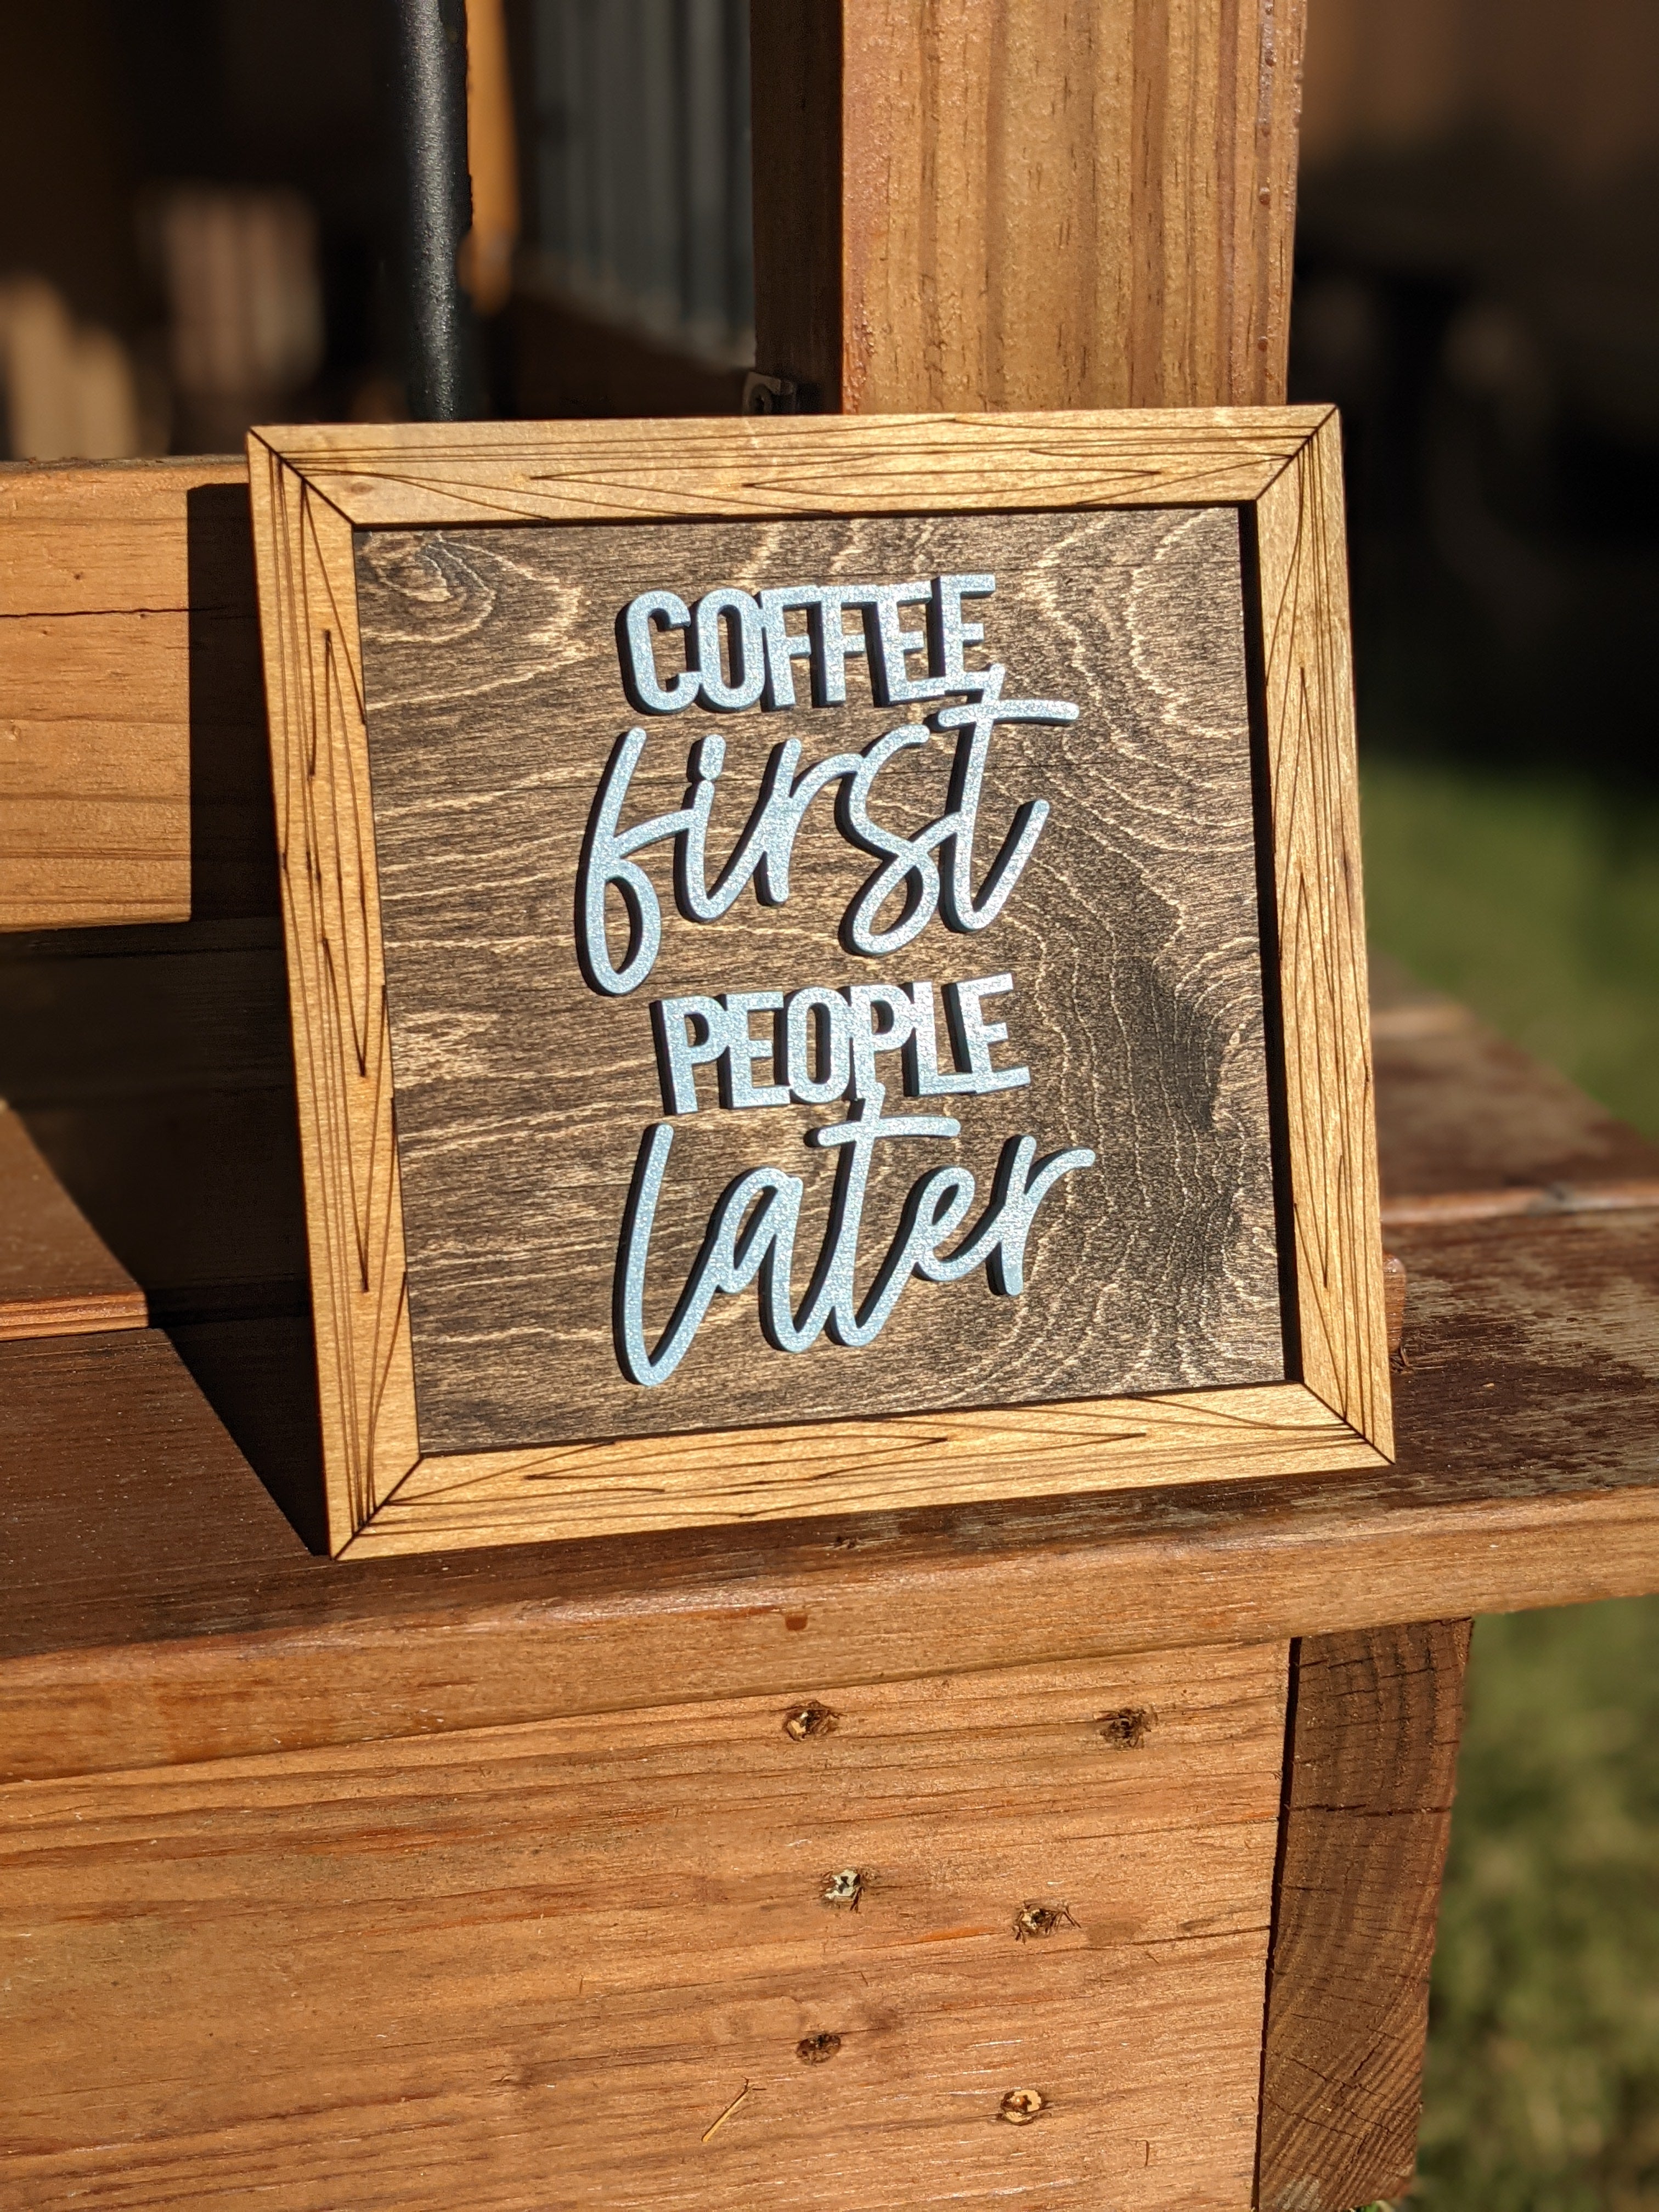 Coffee First People Later Square Sign